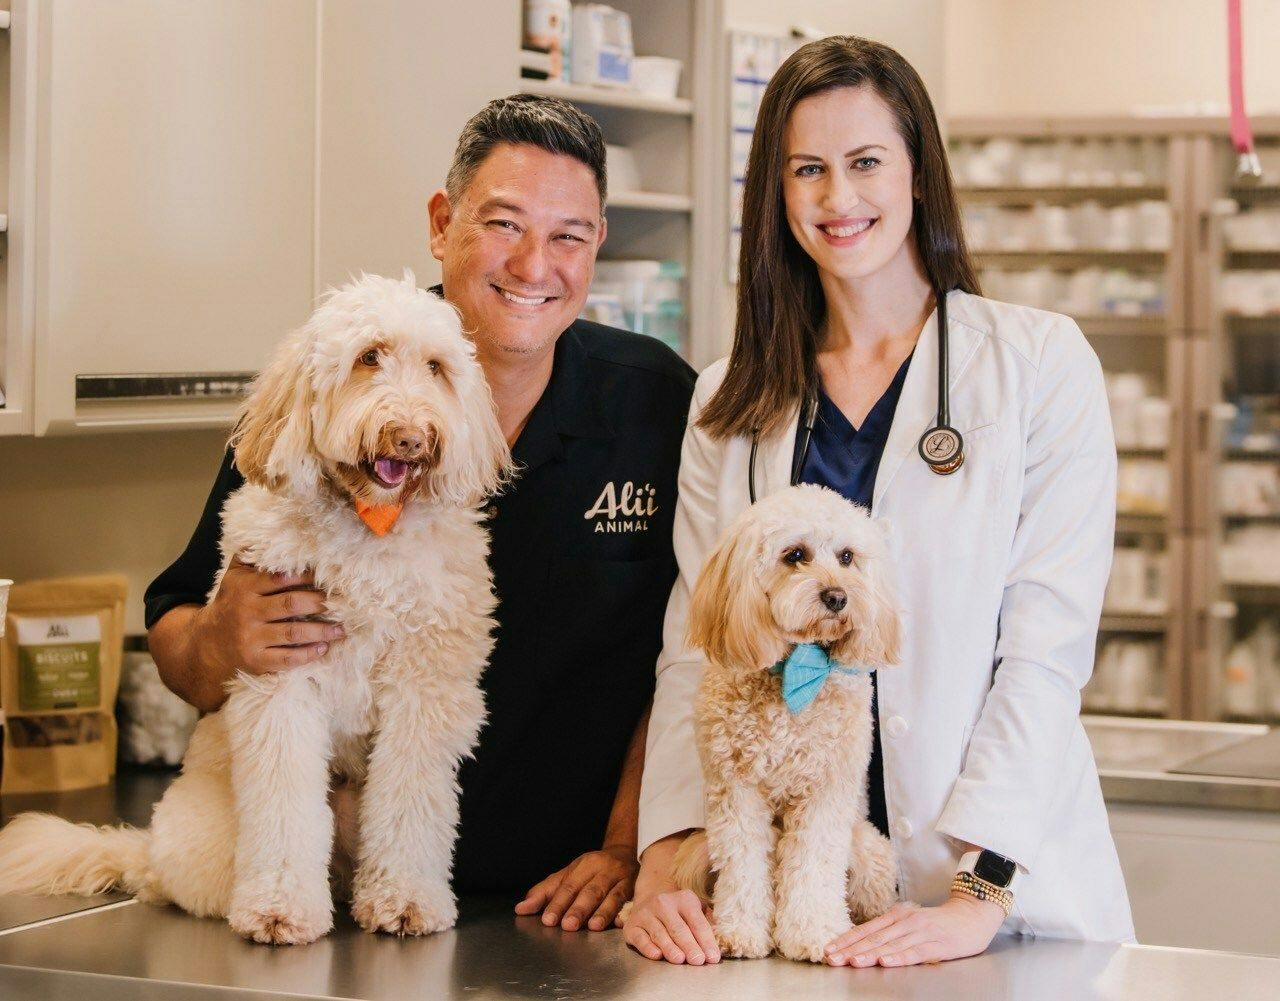 Clinic center: New veterinary locations and services expanding care for pets